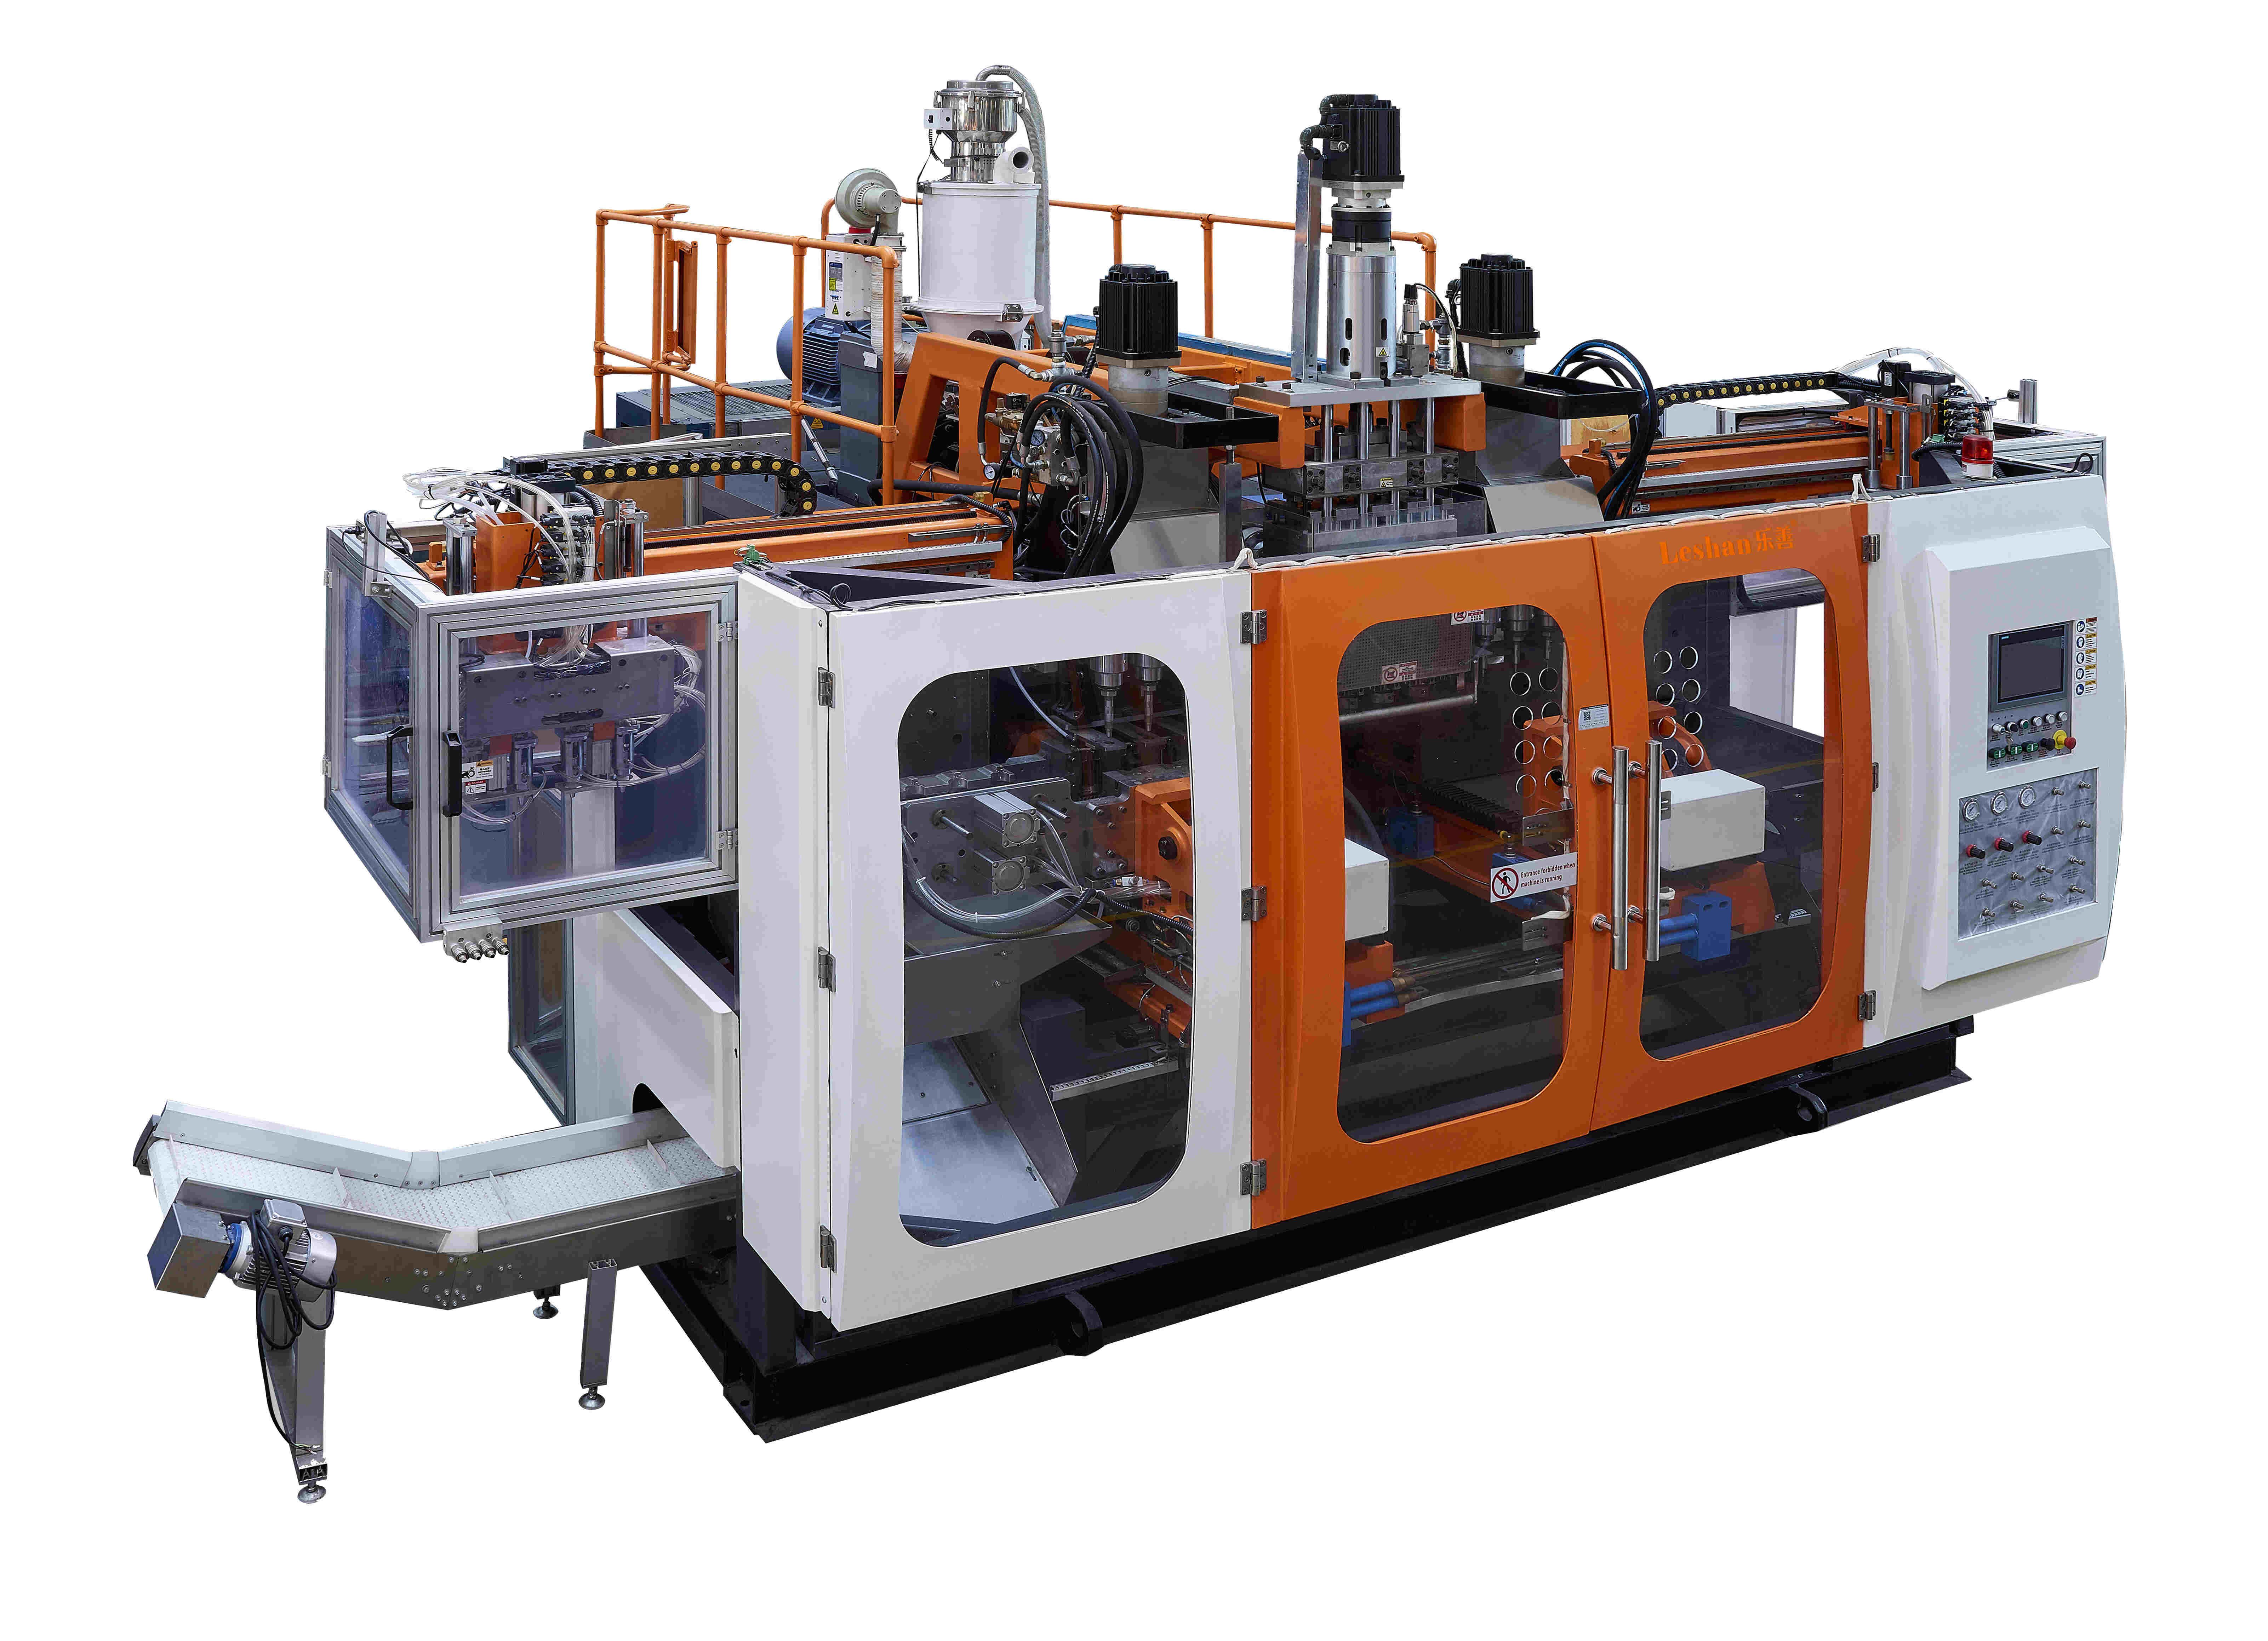 What are the common problems in the production process of cpm extrusion blow moulding machine?